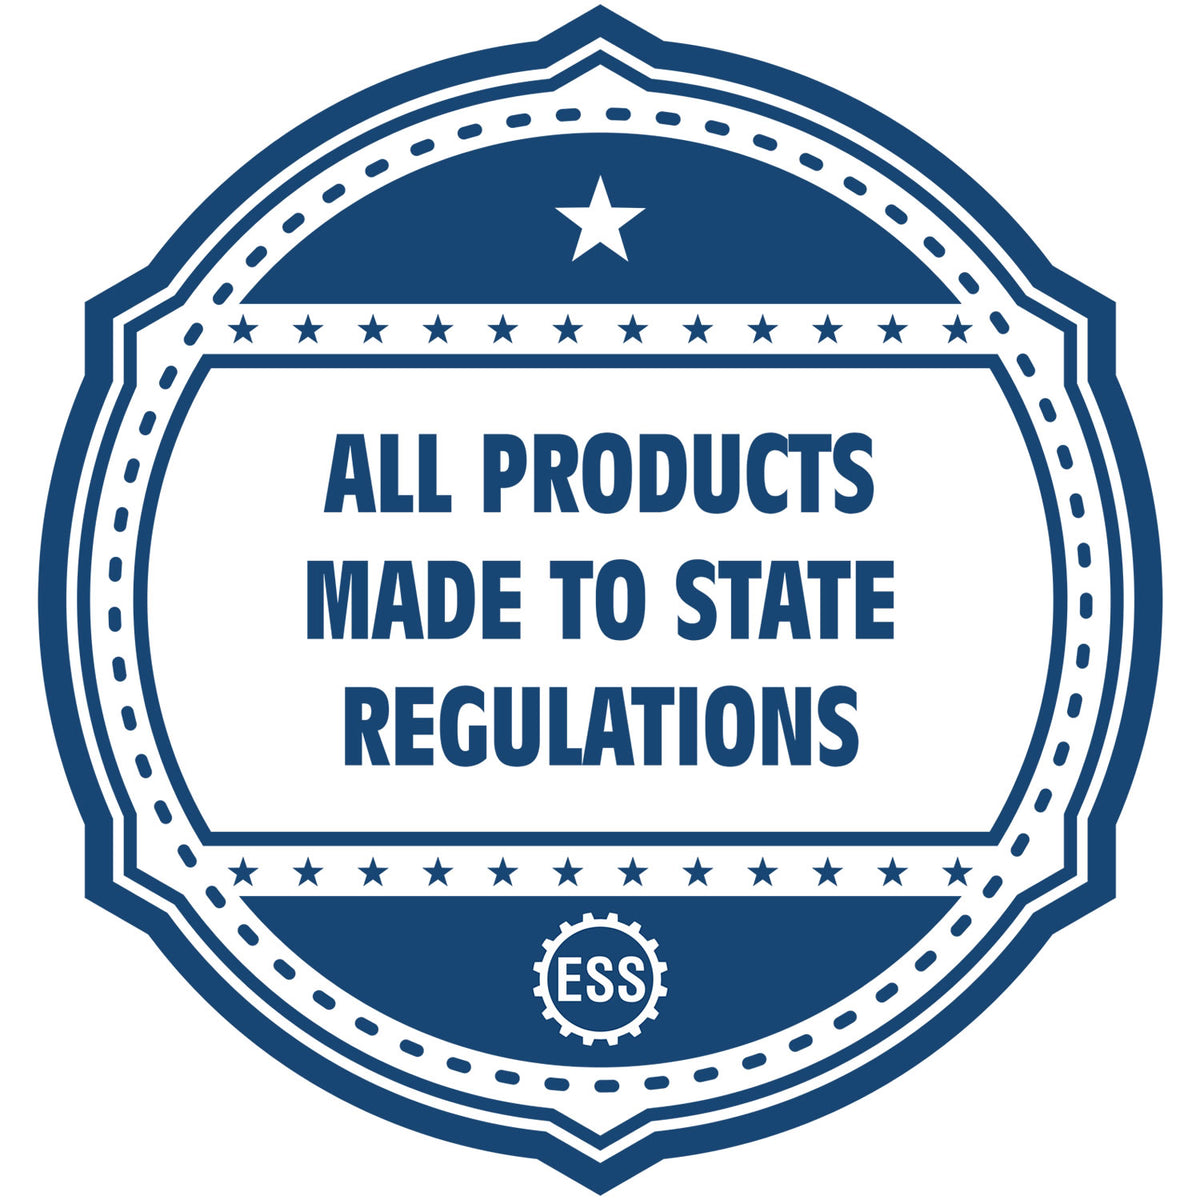 An icon or badge element for the Soft Pocket Iowa Landscape Architect Embosser showing that this product is made in compliance with state regulations.